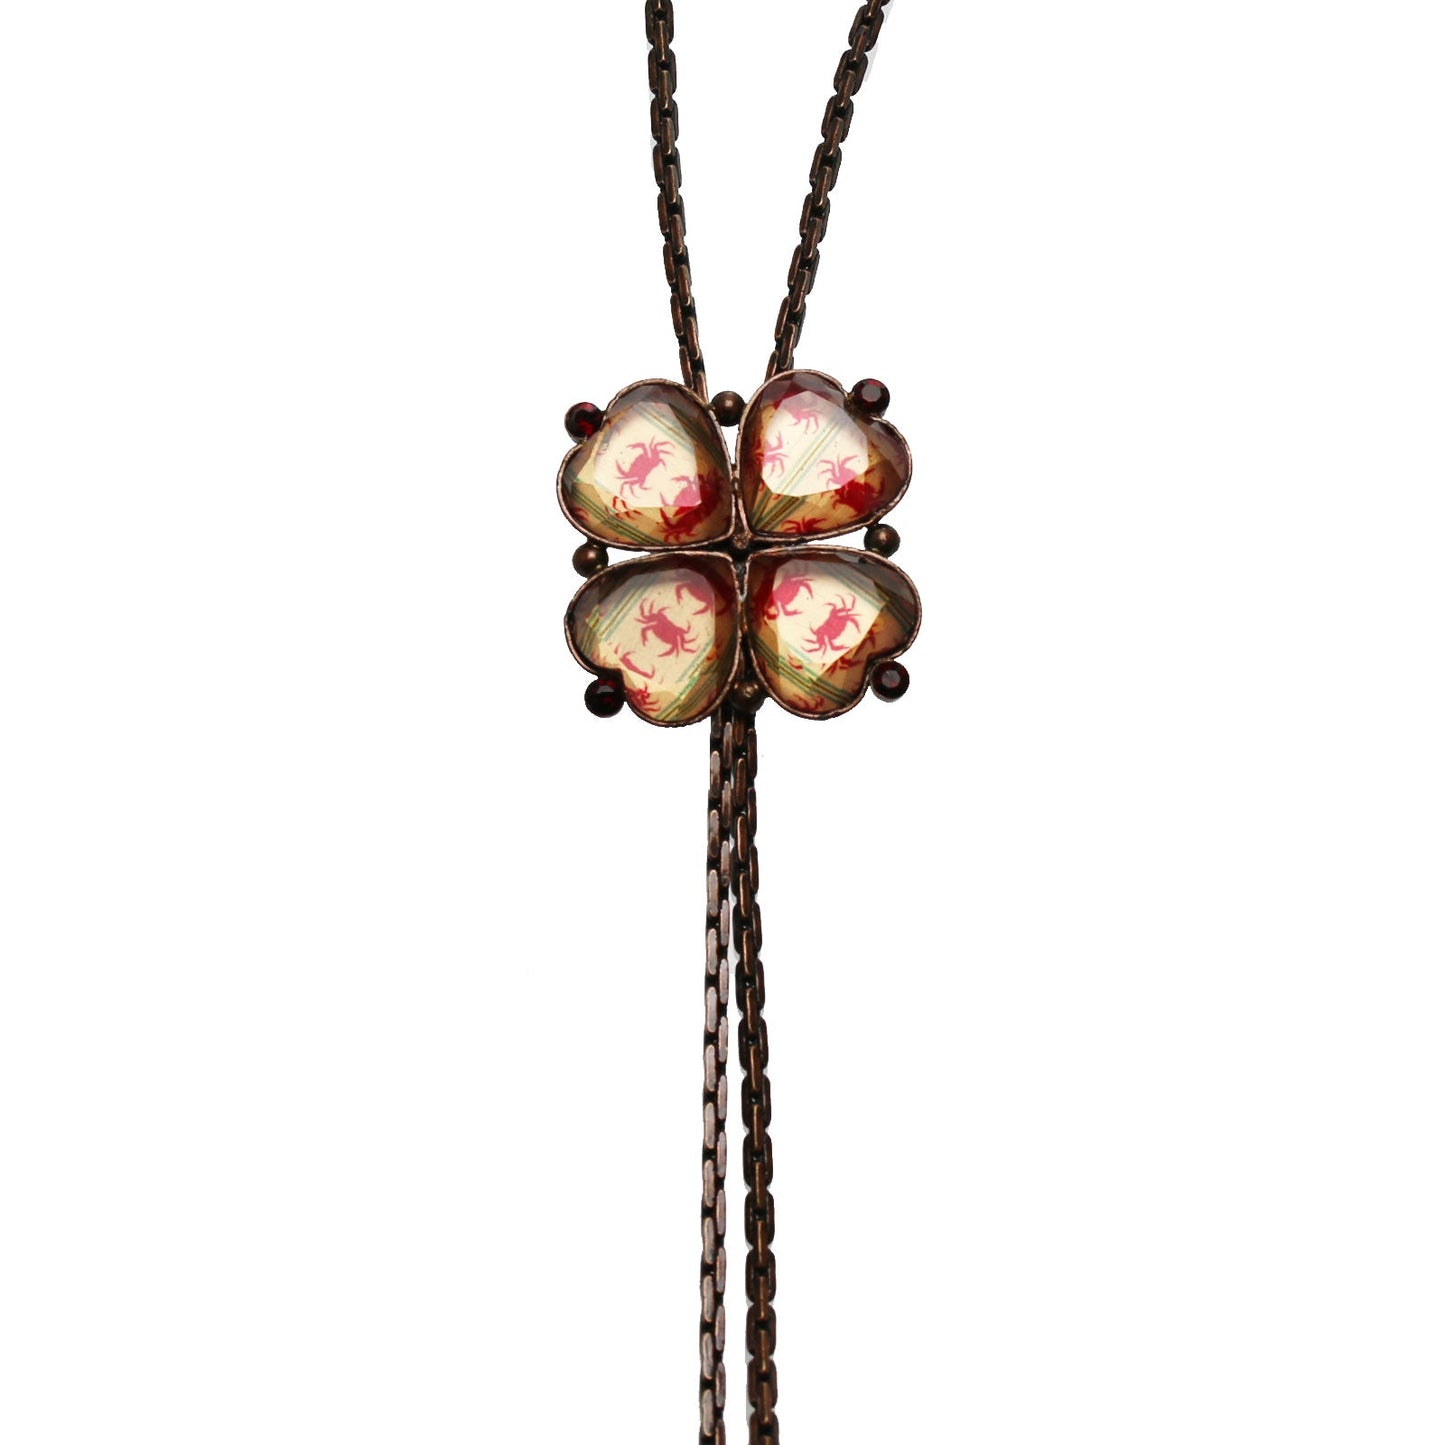 Chain Bolo Tie Crab Red Coral Flower TAMARUSAN